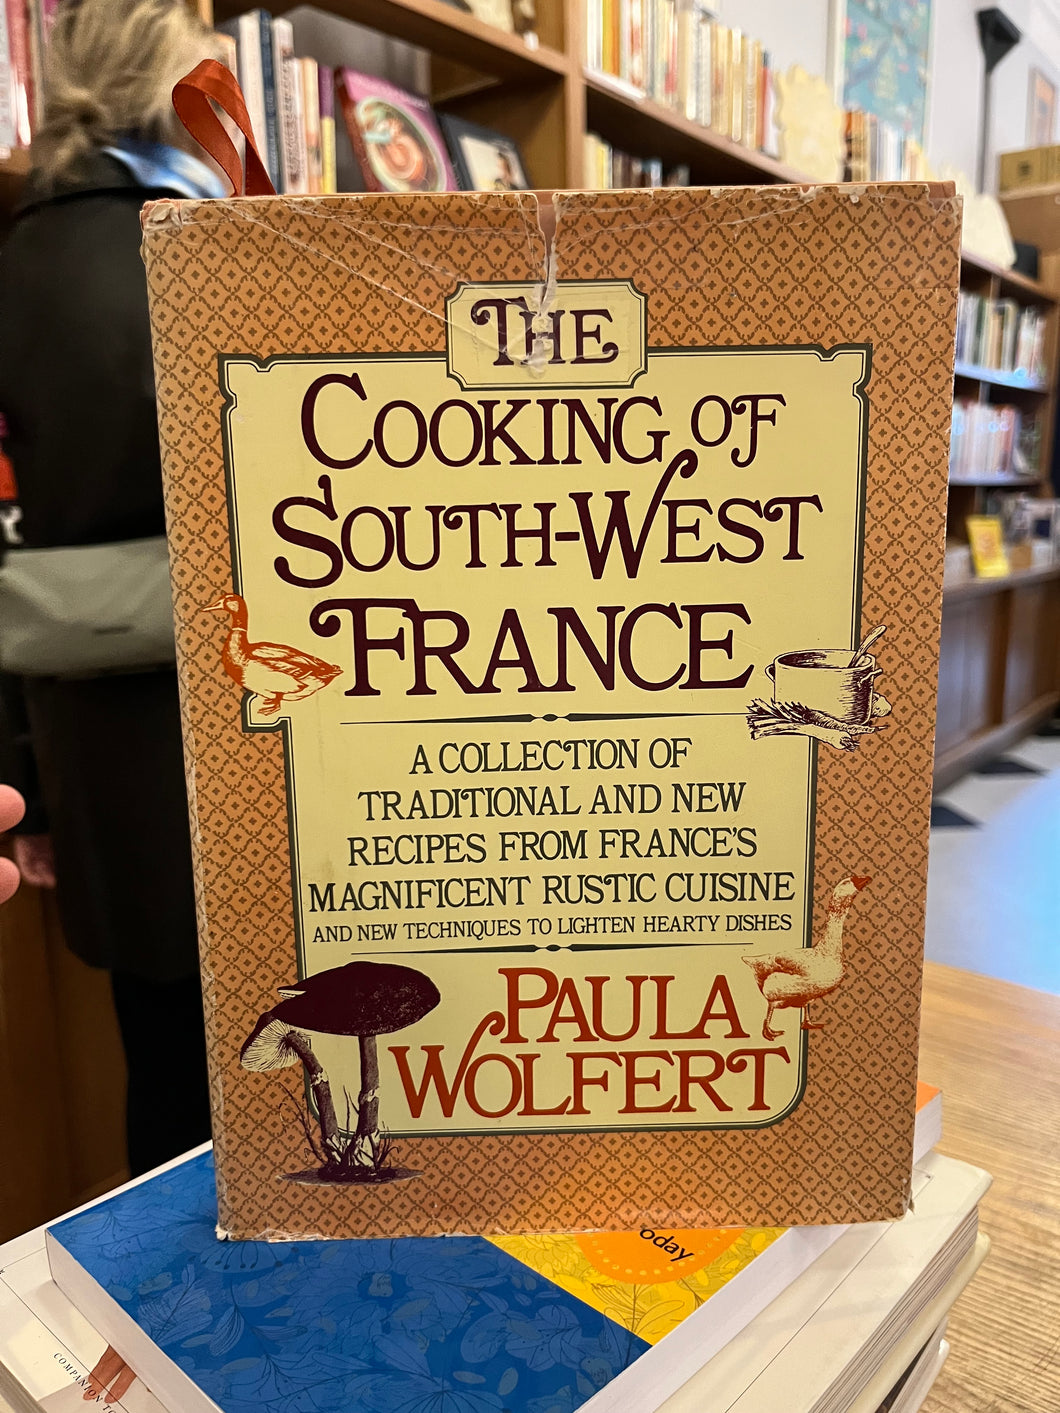 The Cooking of Southwest France: A Collection of Traditional and New Recipes from France's Magnificent Rustic Cuisine, and New Techniques to Lighten Hearty Dishes by Paula Wolfert